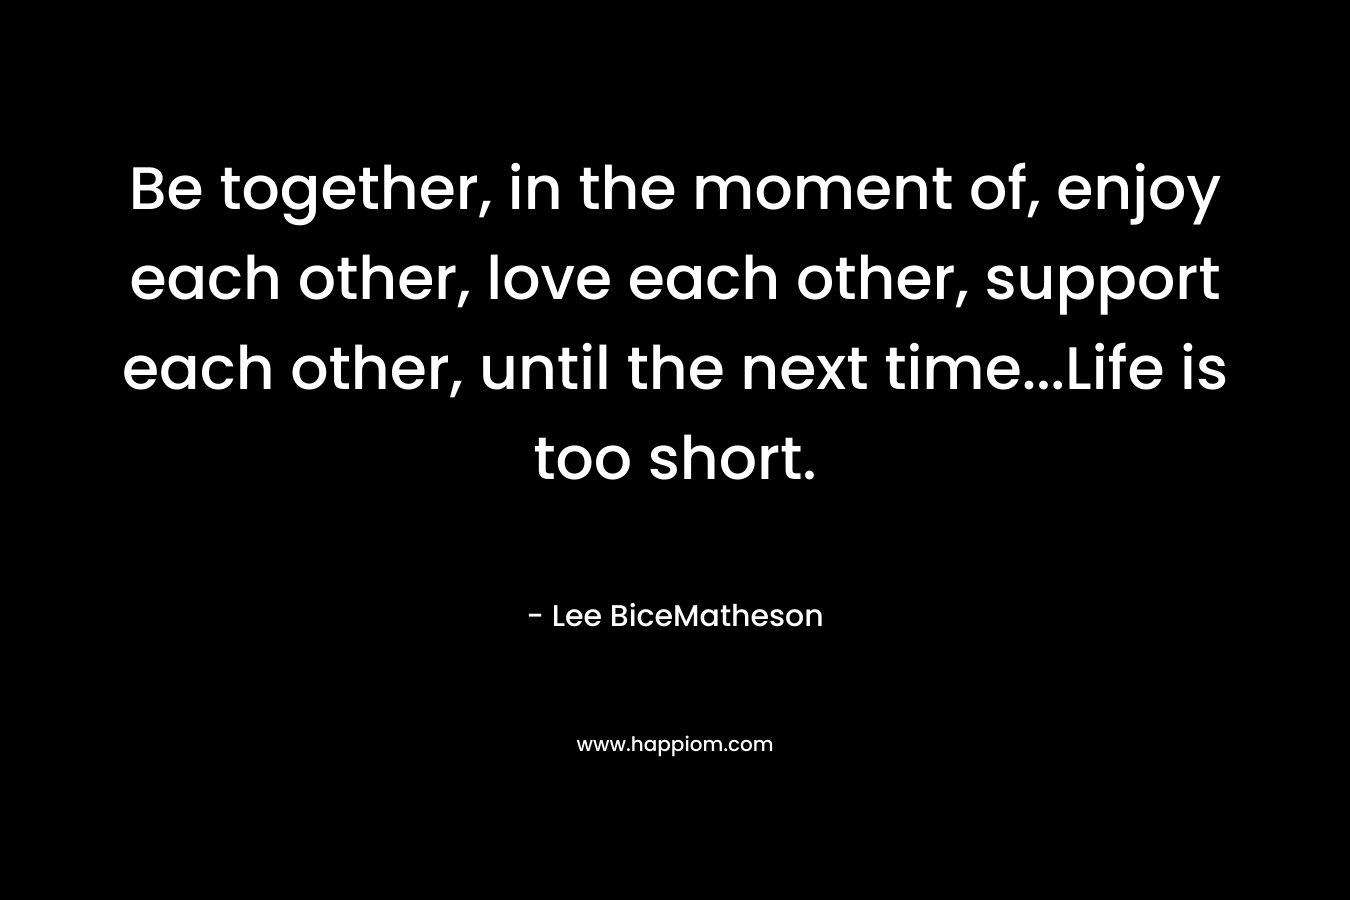 Be together, in the moment of, enjoy each other, love each other, support each other, until the next time...Life is too short.